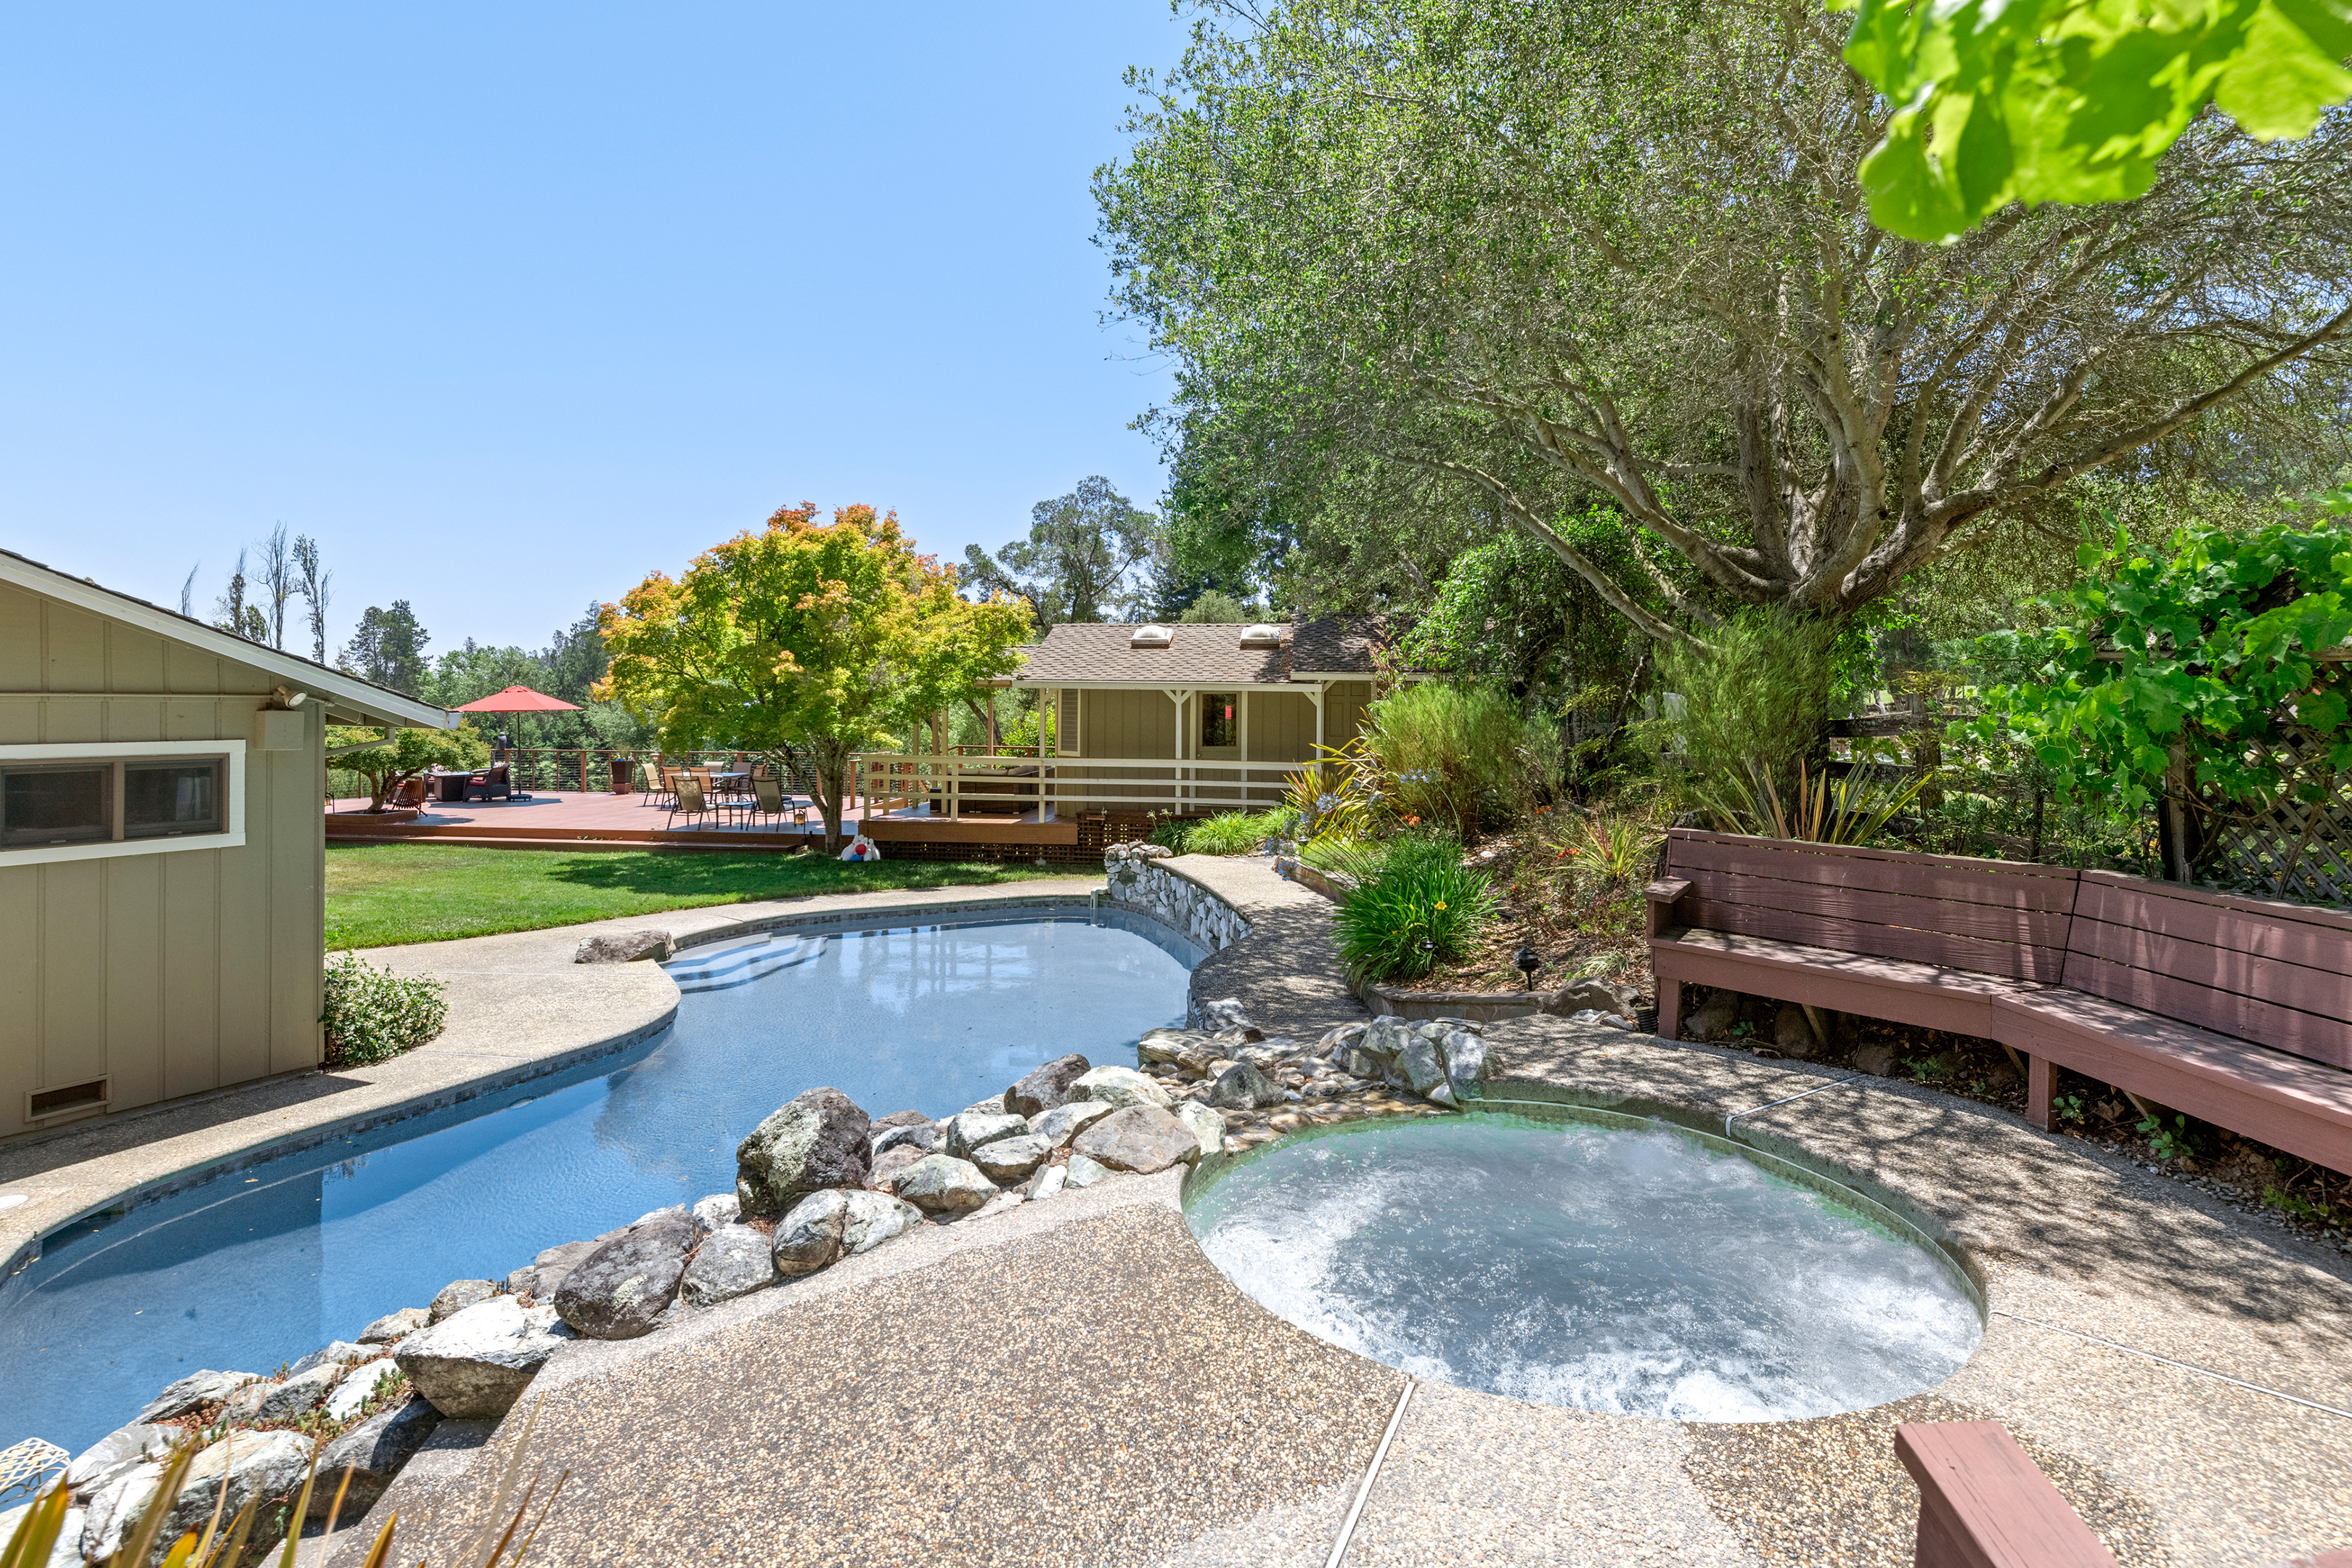 Like an oasis, the hot tub (avail. yearround) overlooks the pool, lawn, and deck.